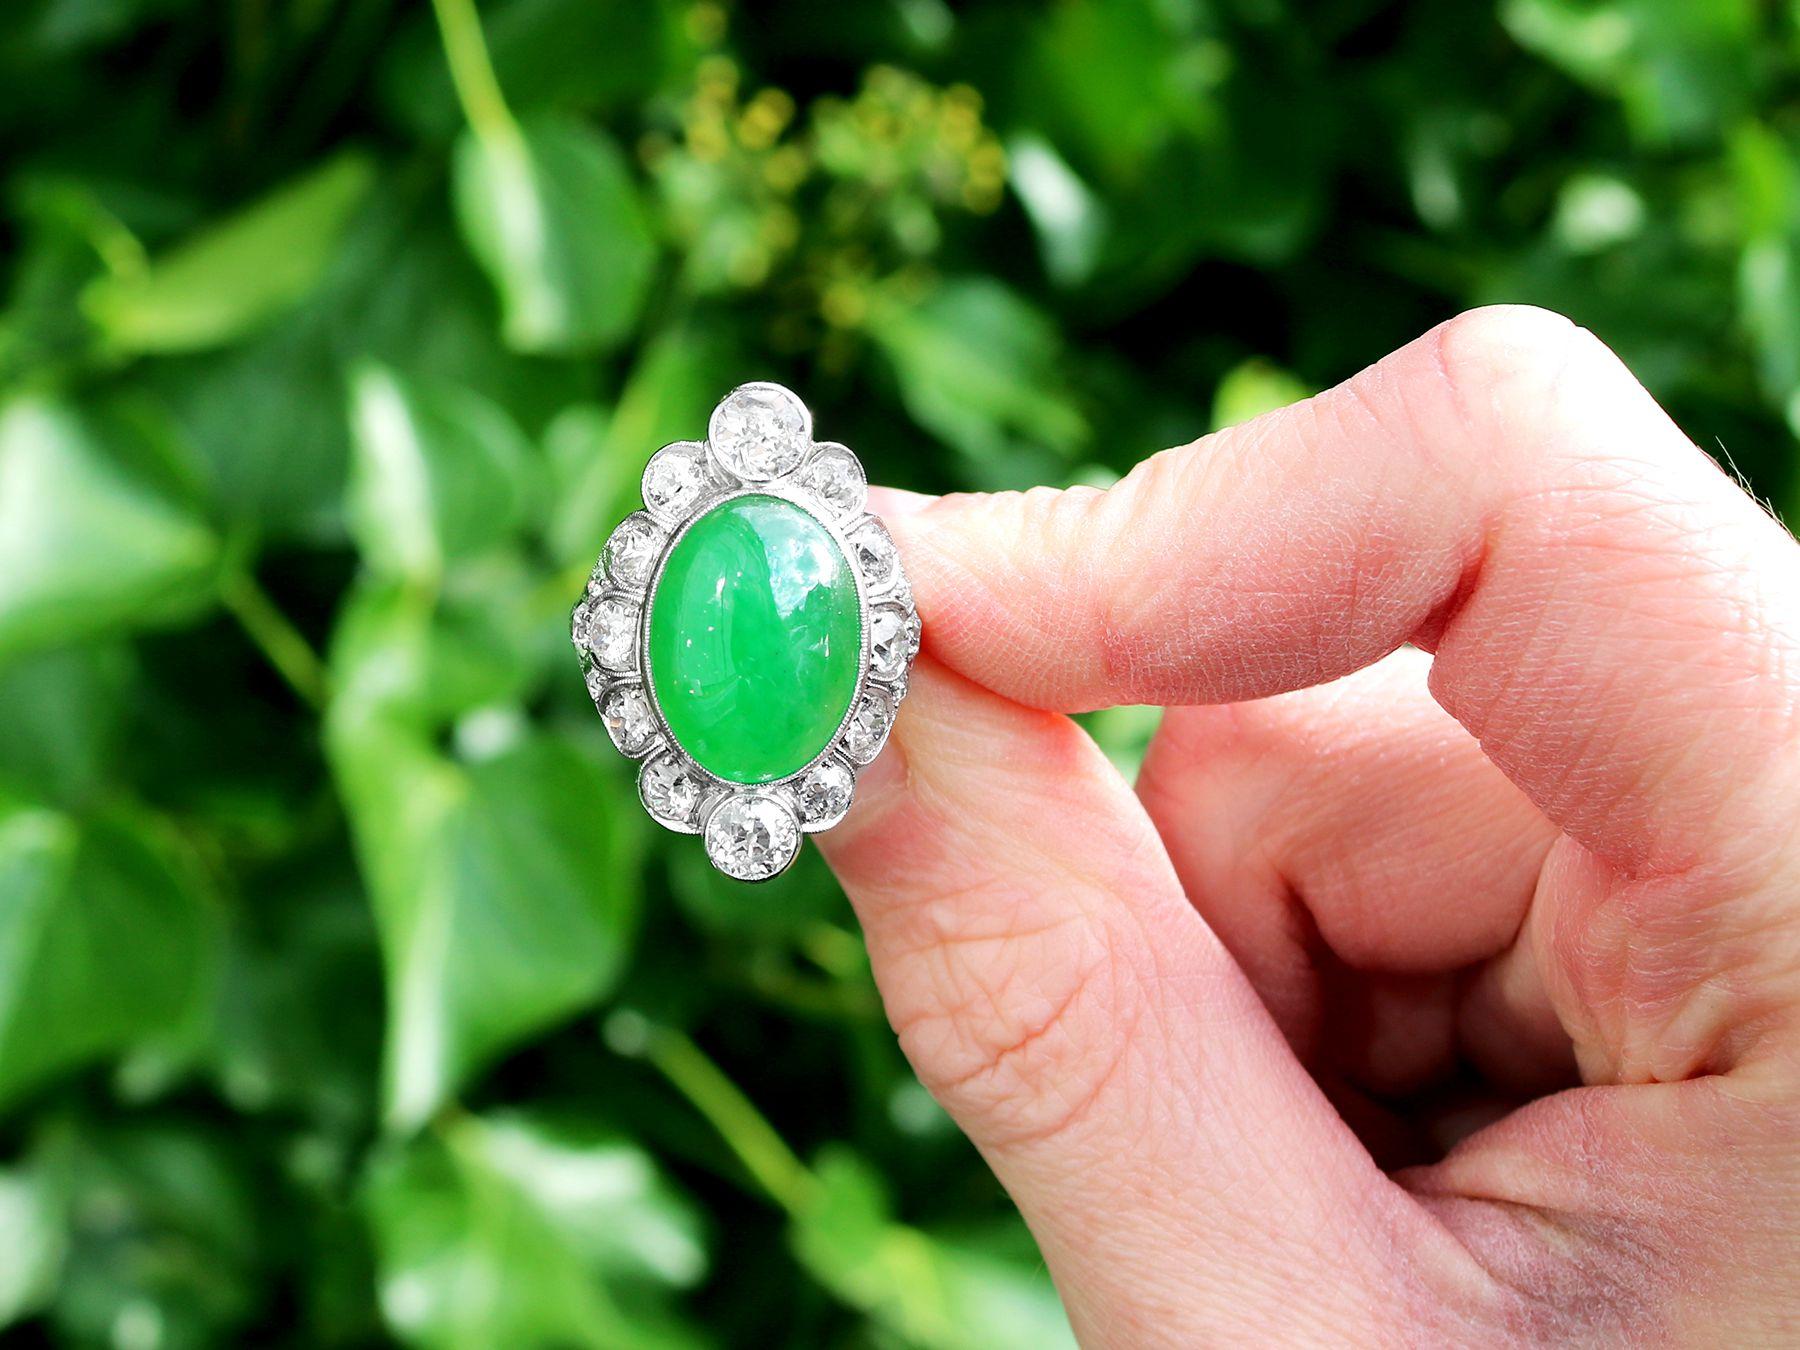 A stunning, fine and impressive antique 9.07 carat jadeite and 2.84 carat diamond, platinum set dress ring; part of our diverse antique jewelry and estate jewelry collections

This stunning antique ring has been crafted in platinum.

The oval shaped